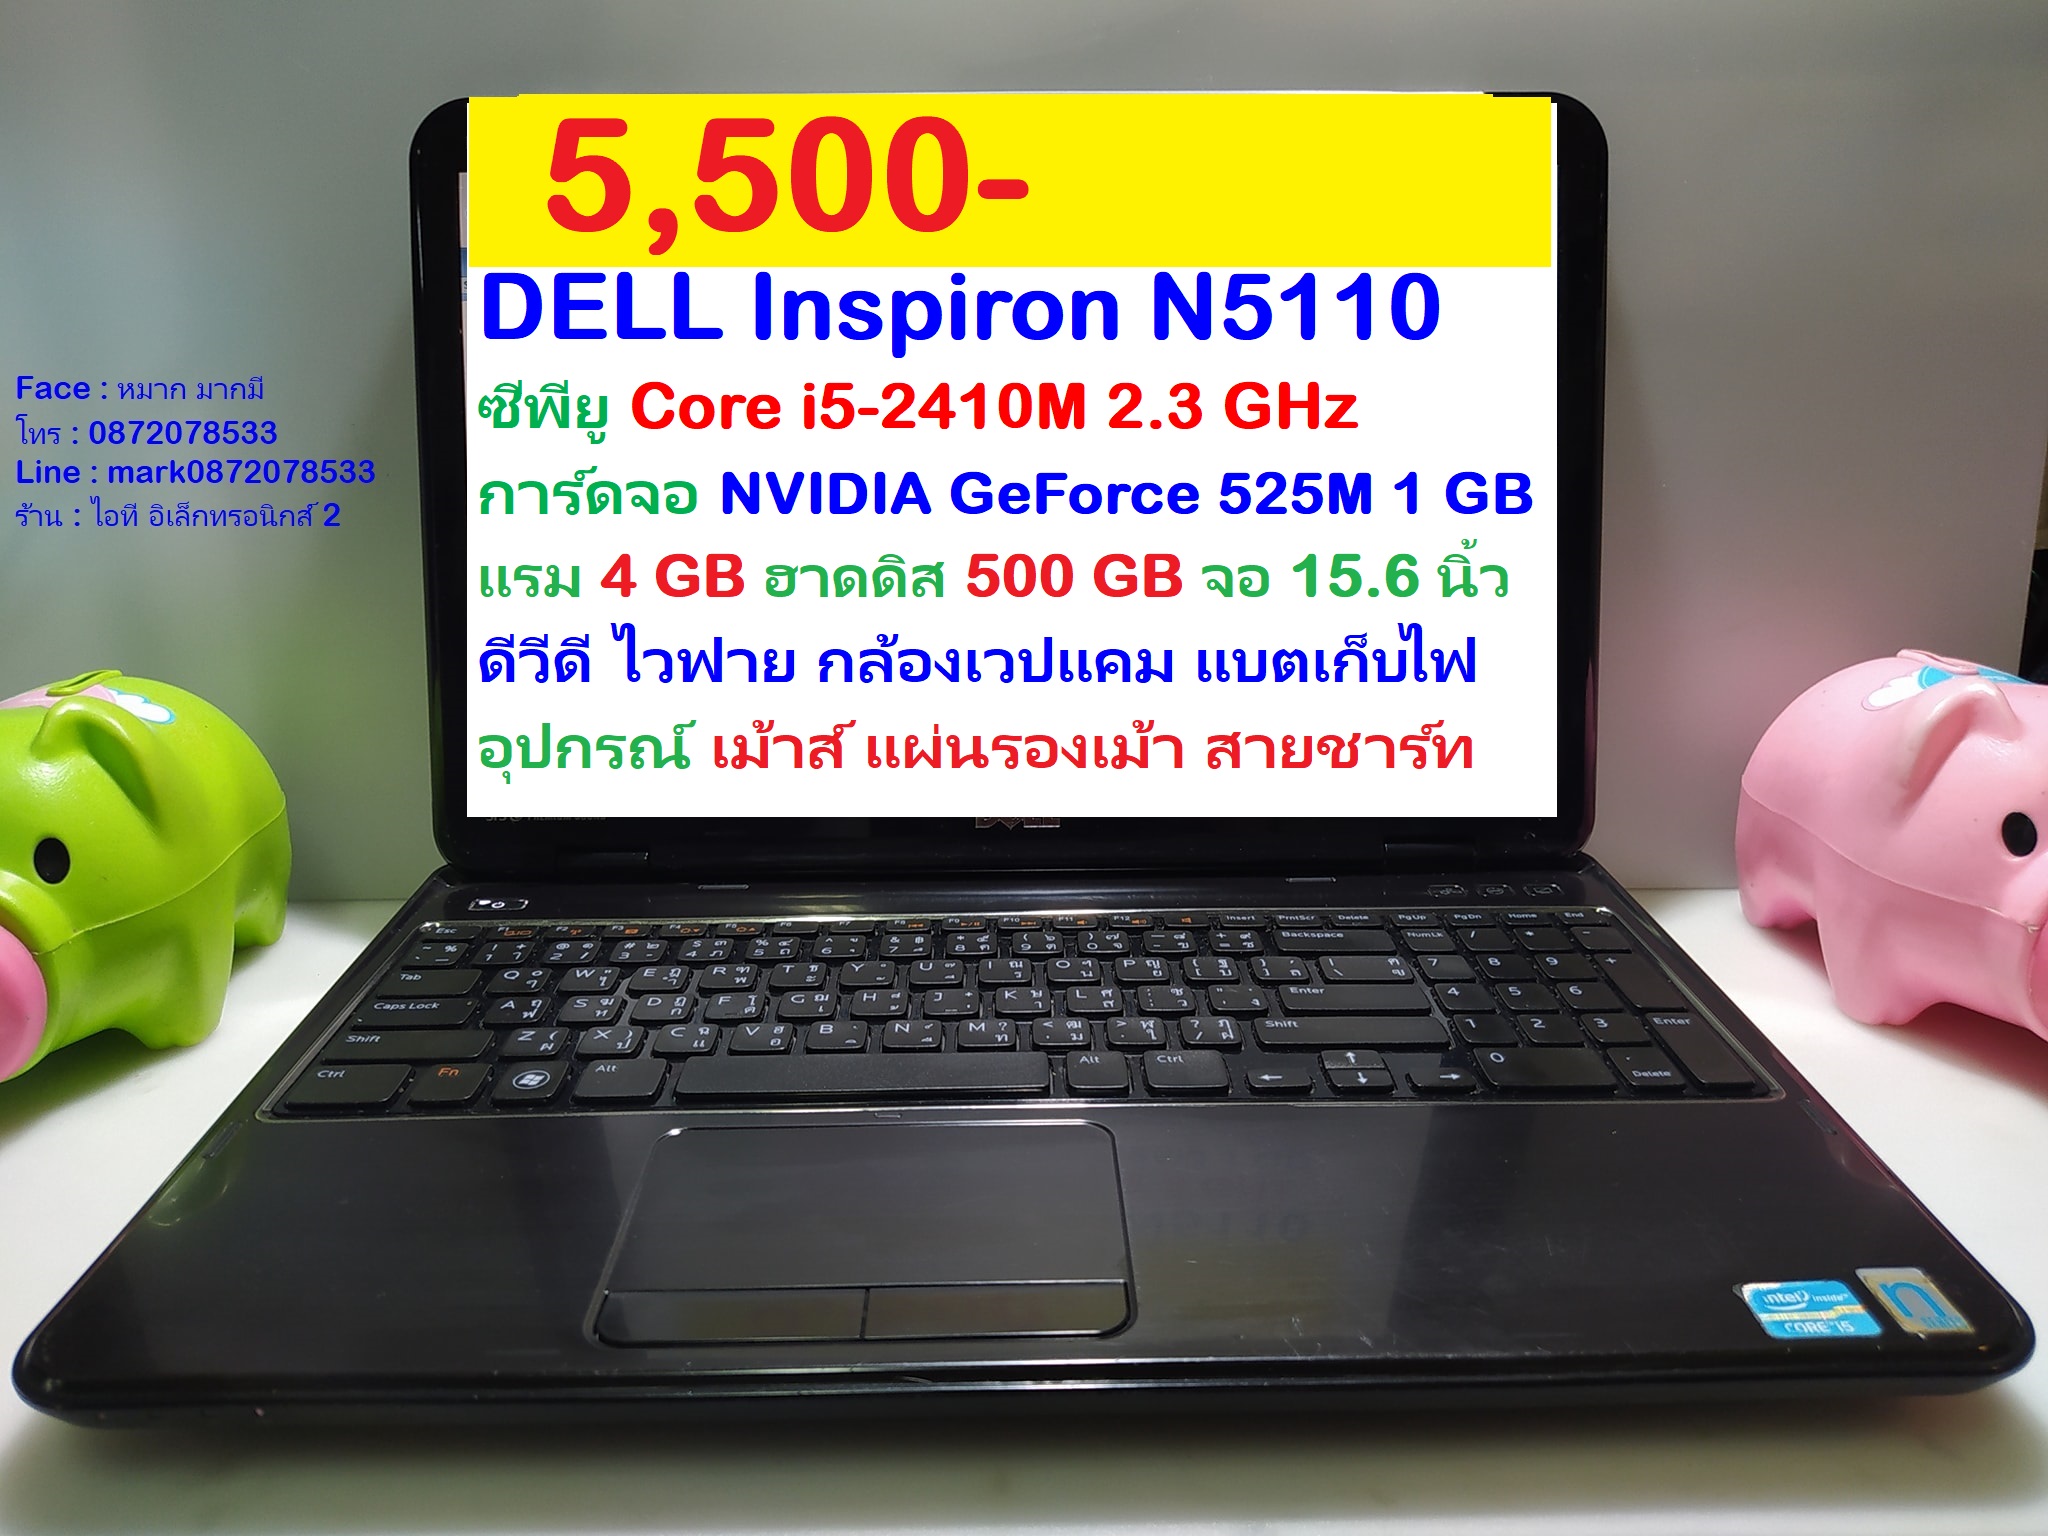 DELL Inspiron N5110 Core i5-2410M 2.3 GHz  รูปที่ 1